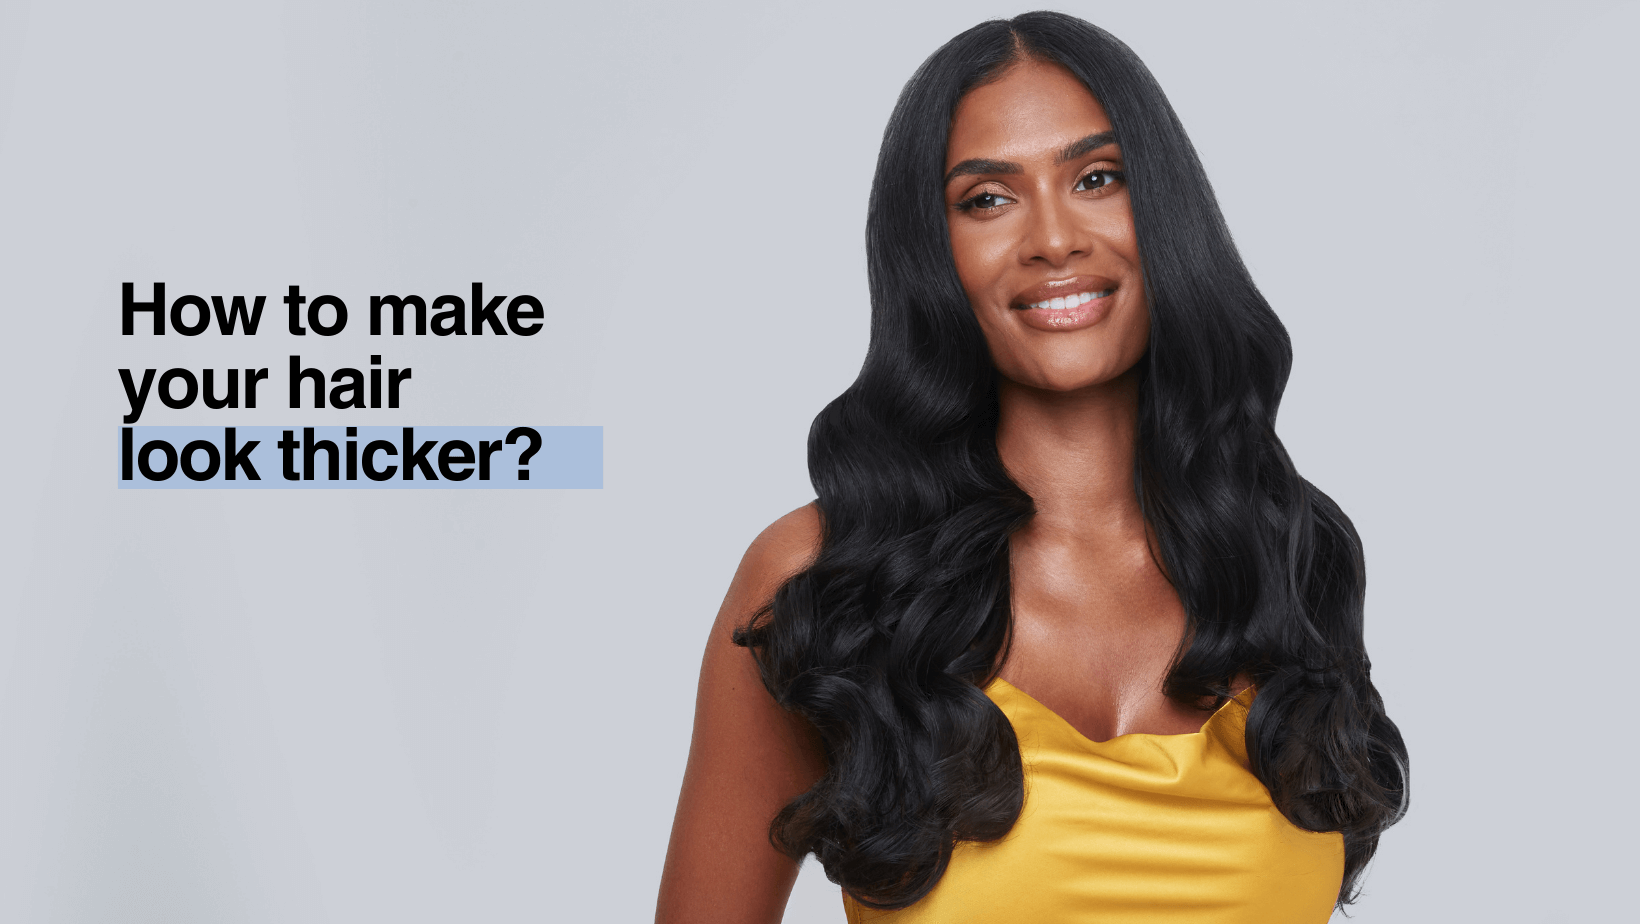 How To Make Your Hair Look Thicker